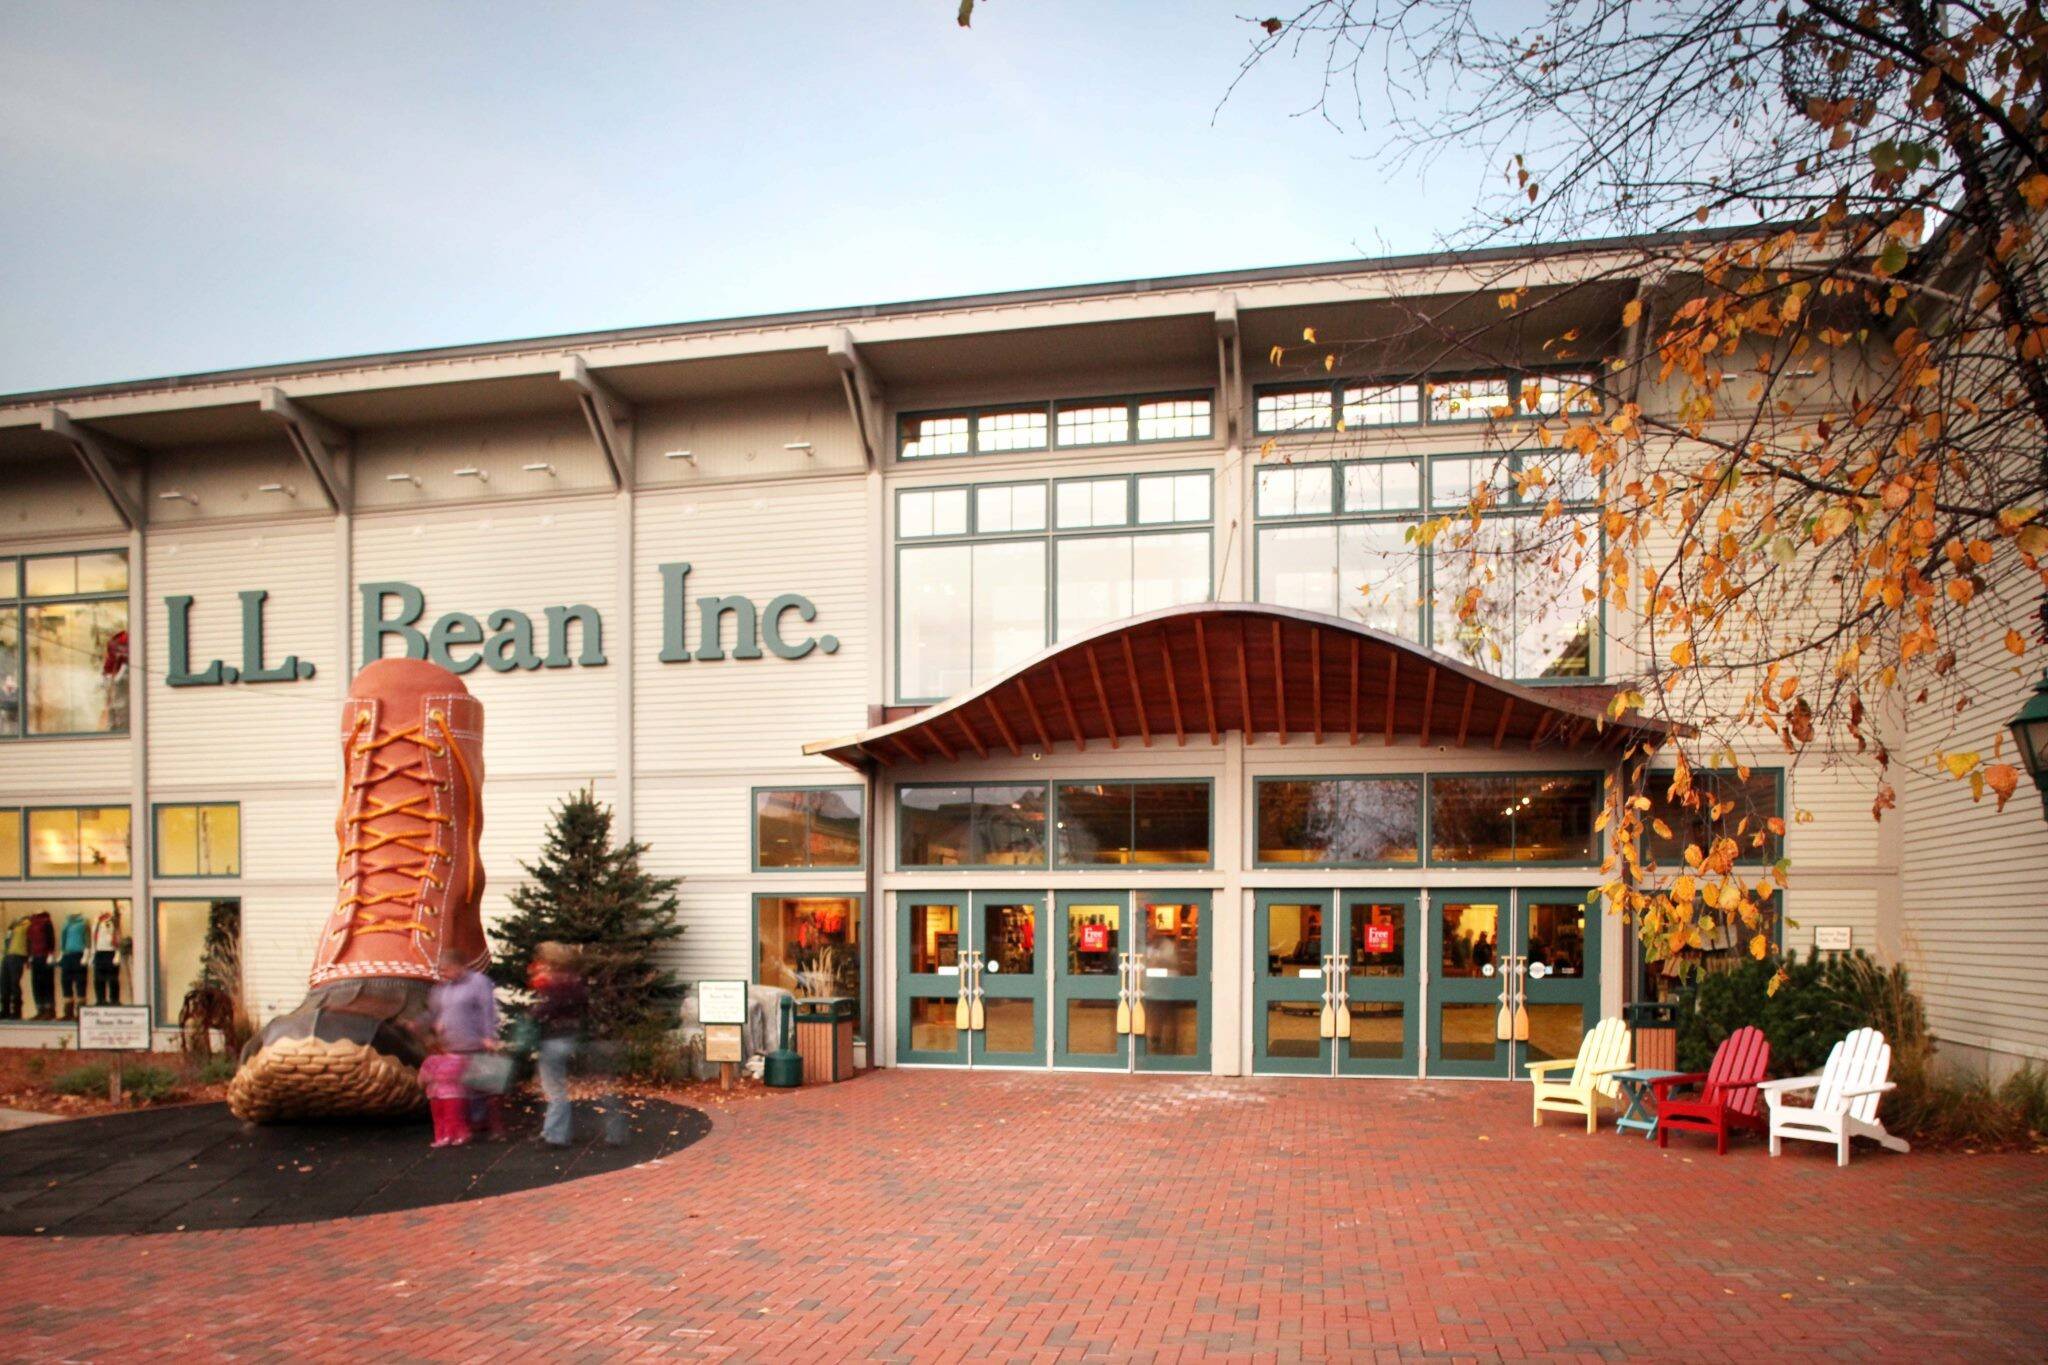 L.L. Bean is opening their first Canadian location near Toronto next month